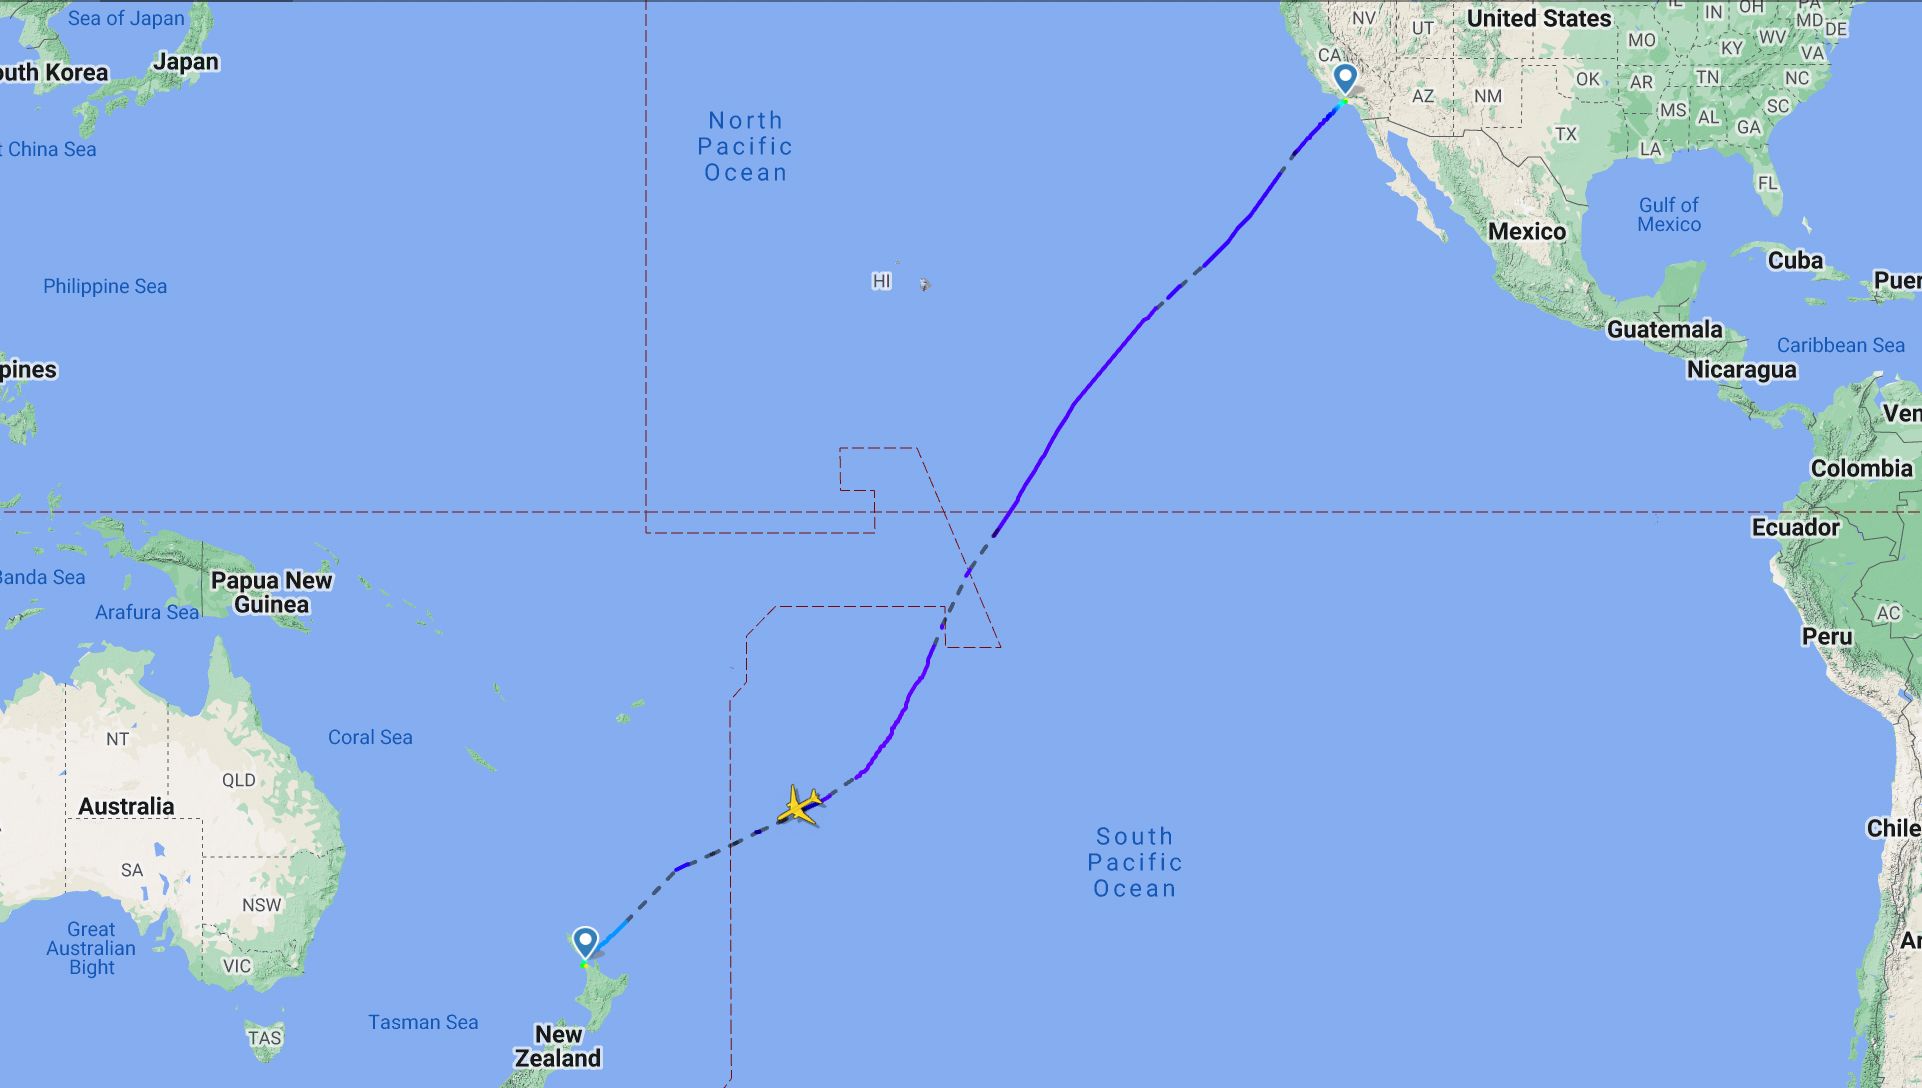 The Air New Zealand B777 was over the Pacific Ocean